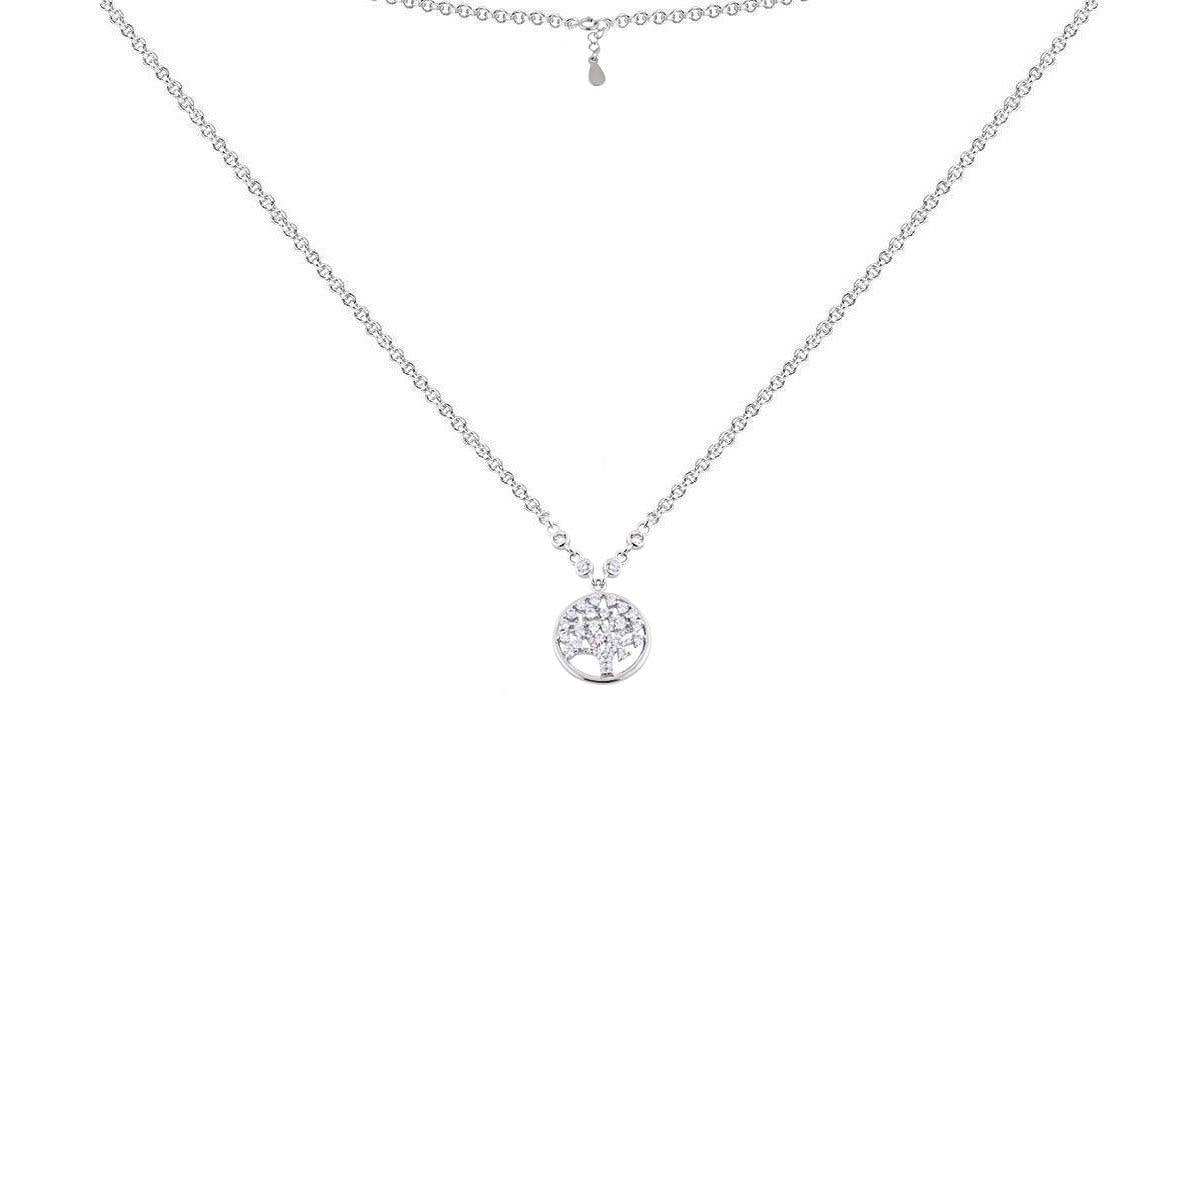 Necklace N1291 - 925 Sterling Silver - Asfour Crystal